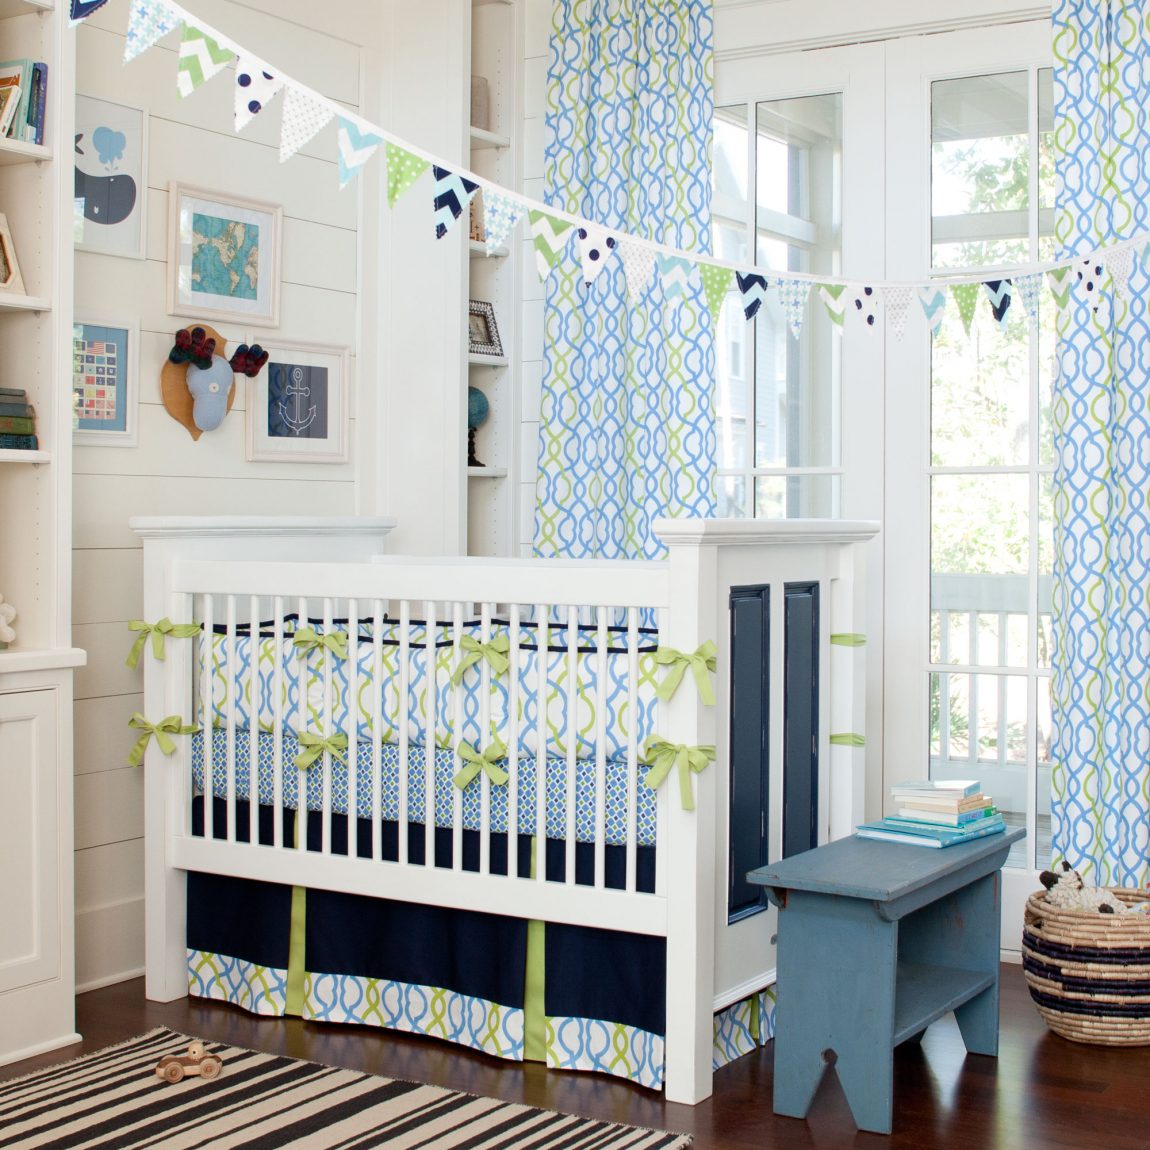 Blue Themed With Trendy Blue Themed Nursery Idea With Baby Boy Crib Bedding Decorated With Patterned Banners And Curtain Interior Design Enchanting Baby Boy Crib Bedding Applied In Colorful Baby Room